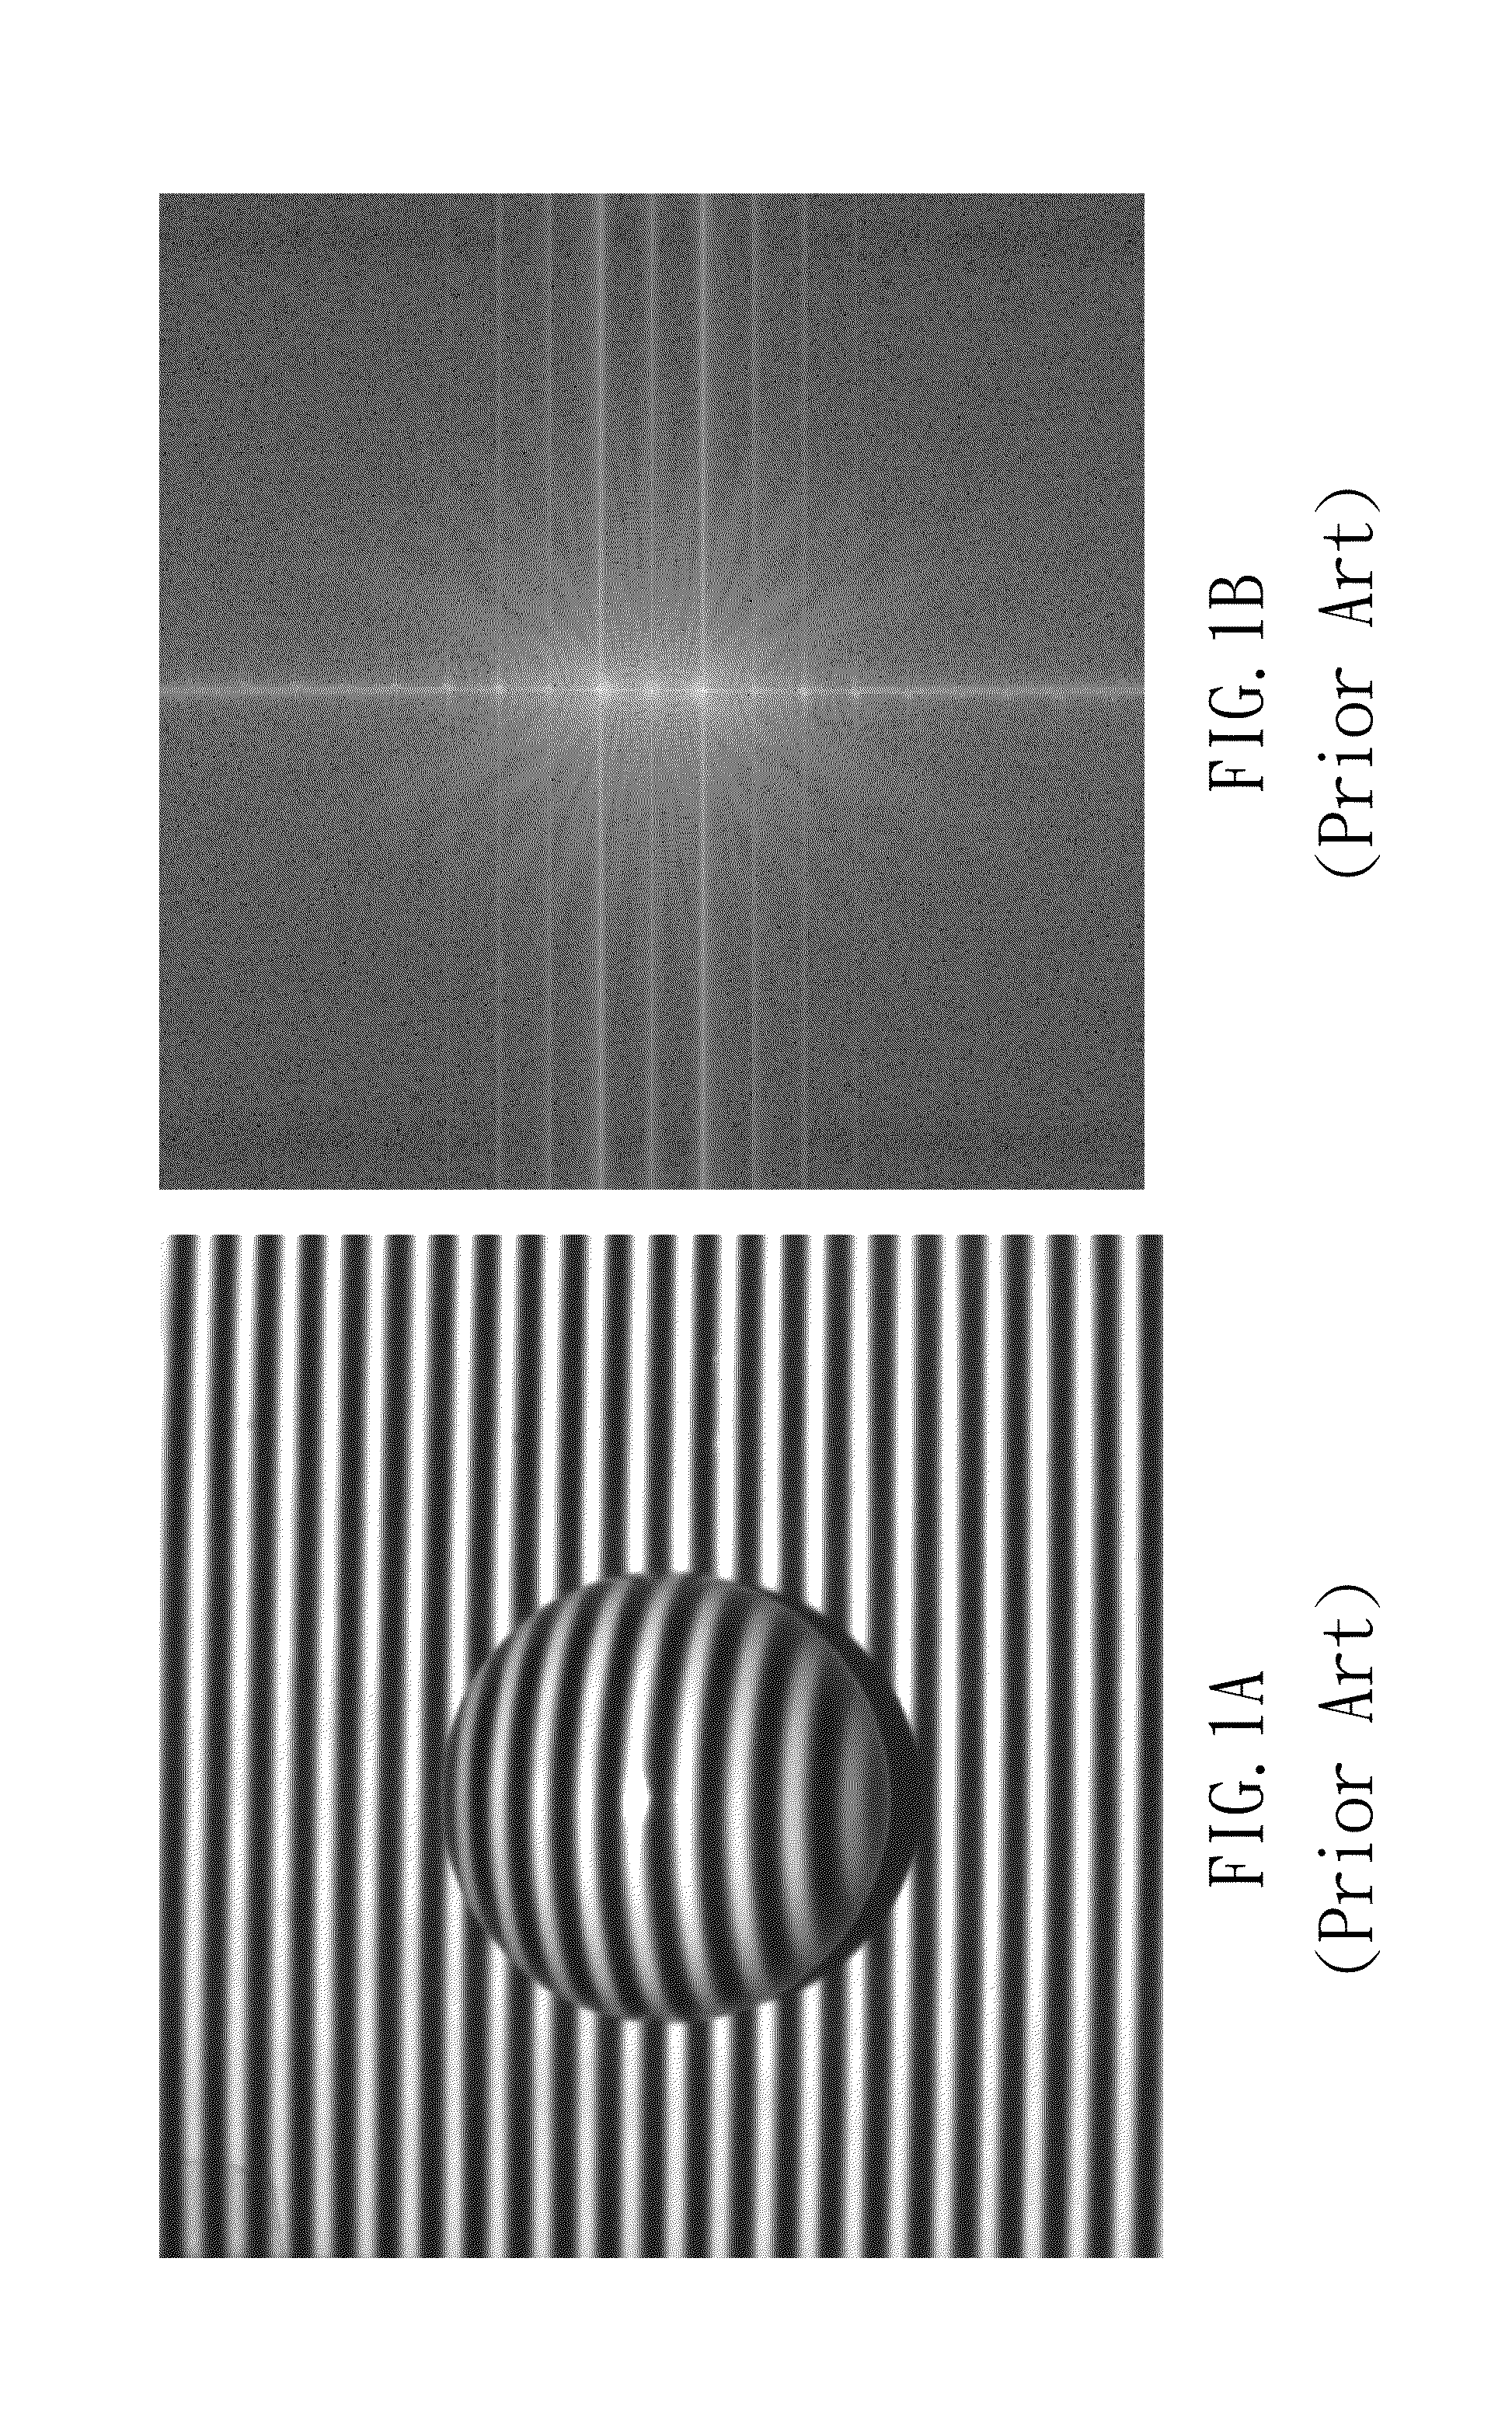 Method for acquiring phase information and system for measuring three dimensional surface profiles